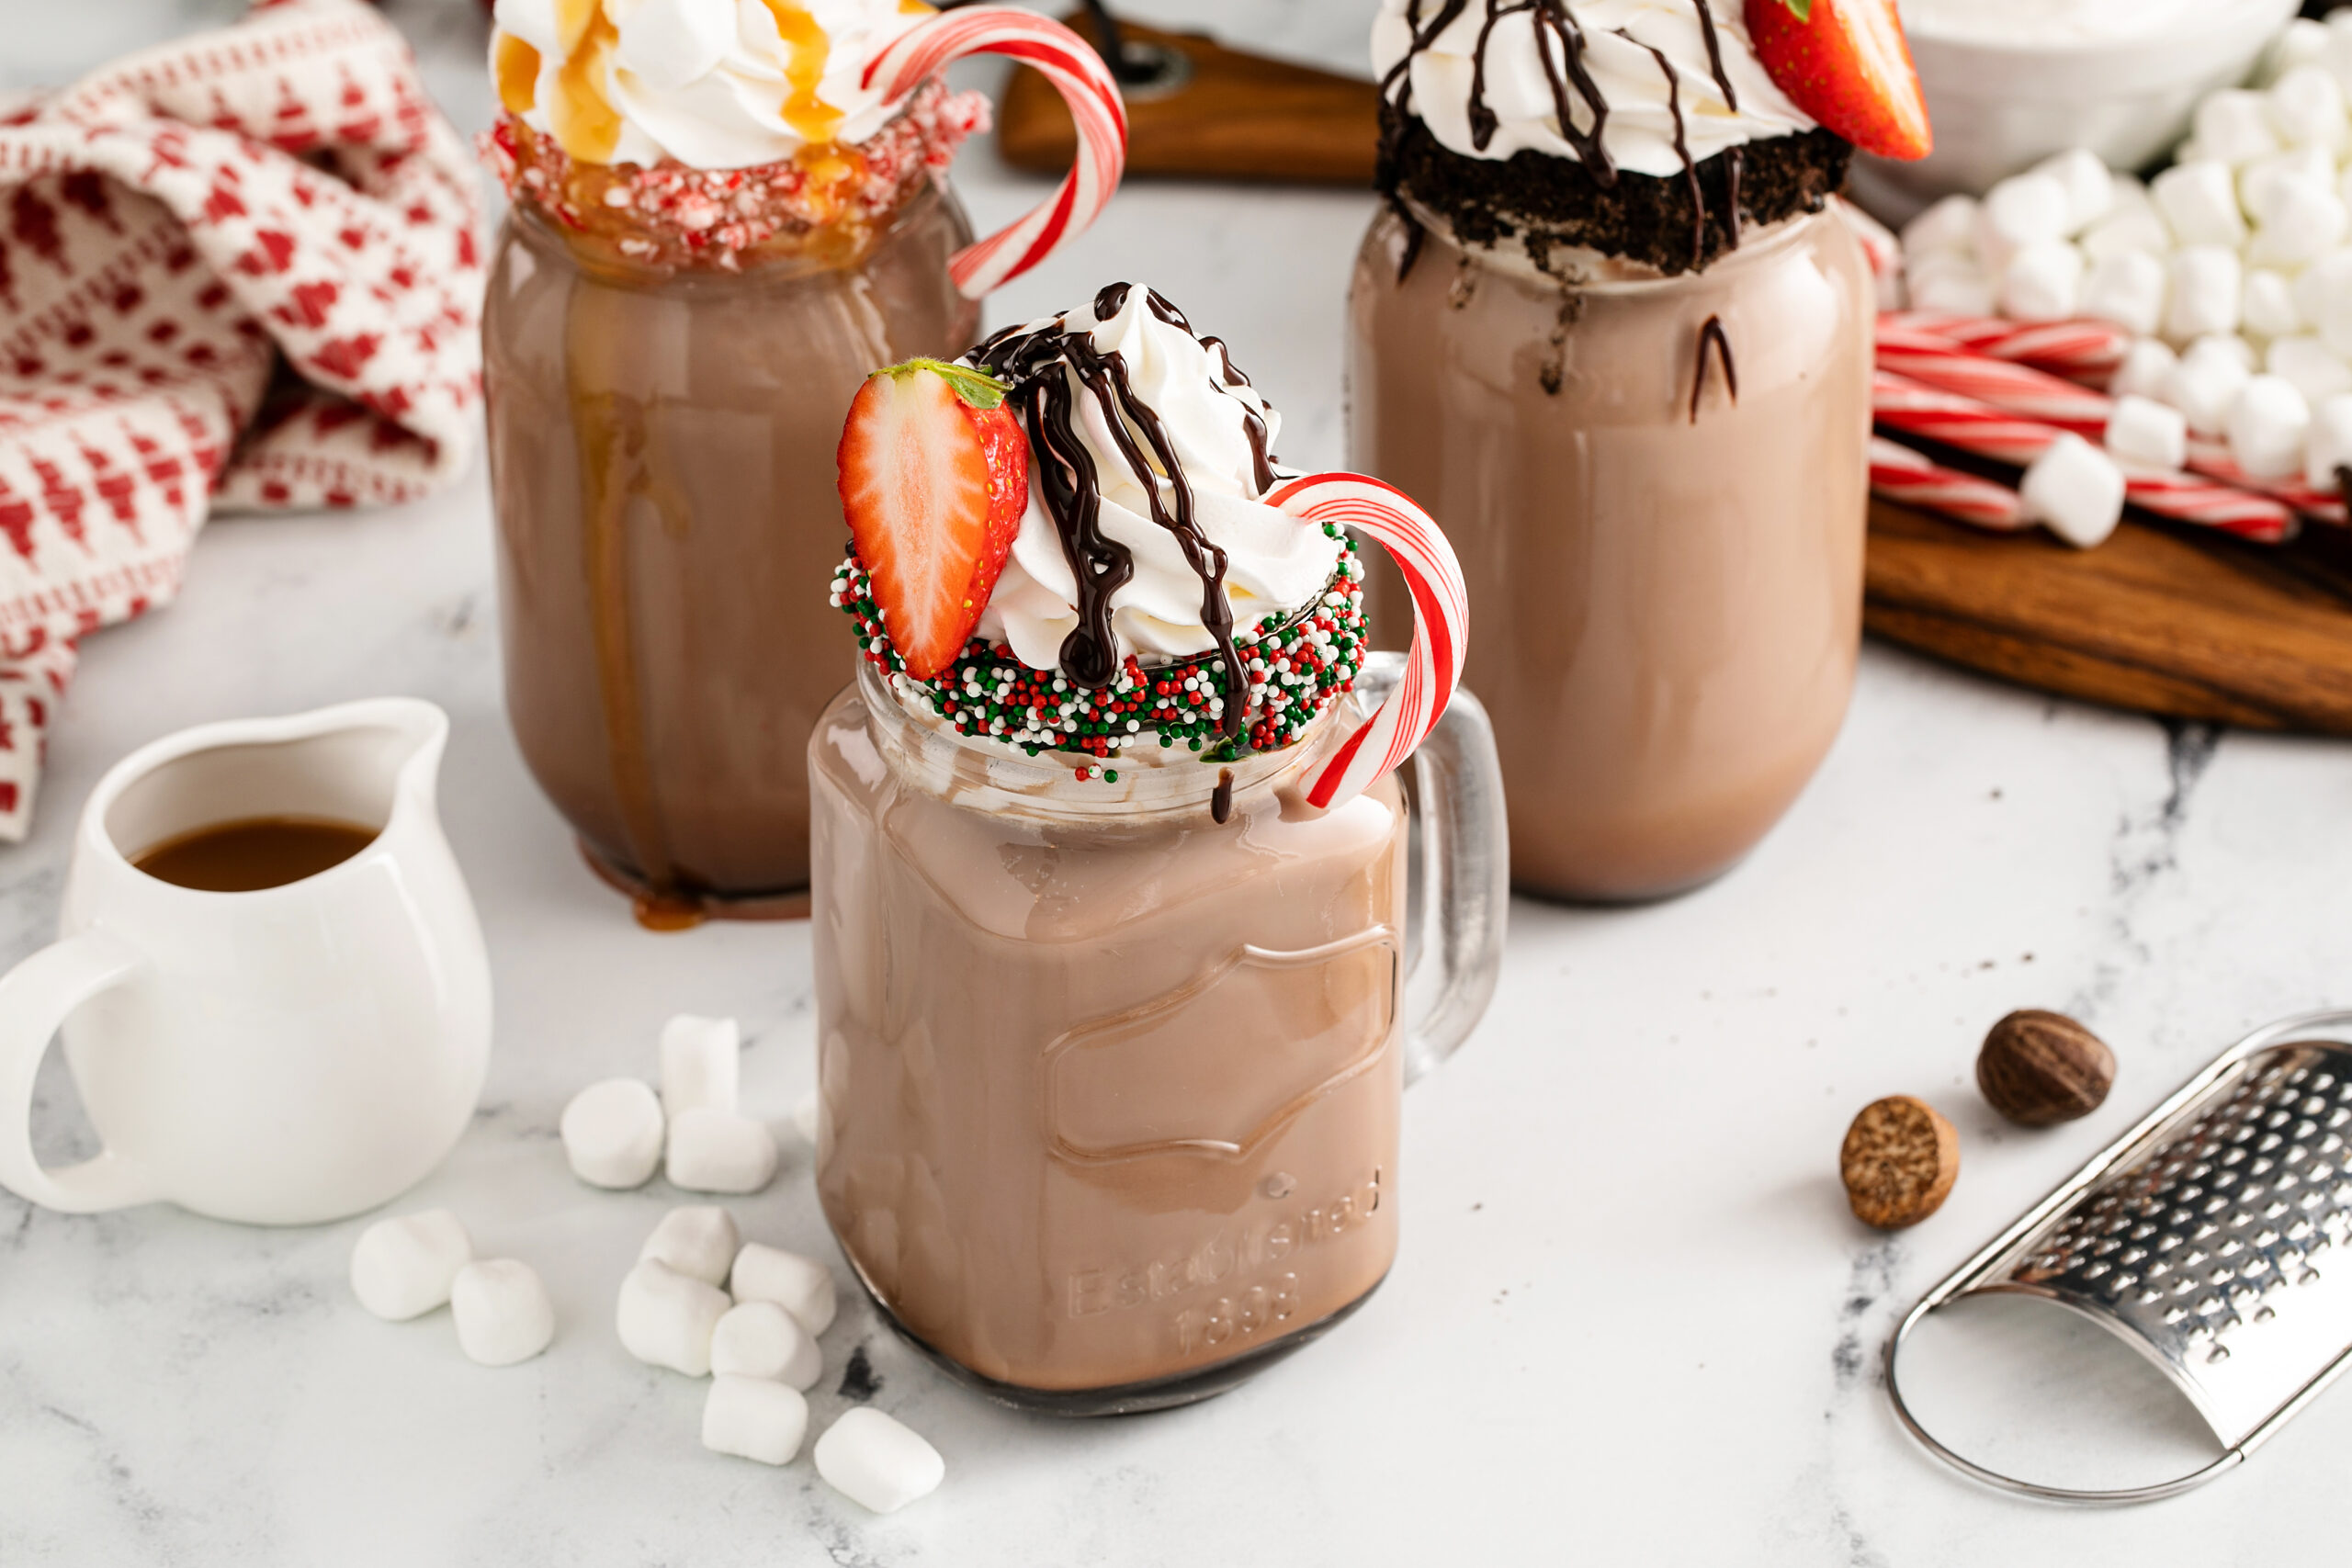 How to Create the Ultimate Hot Chocolate Bar